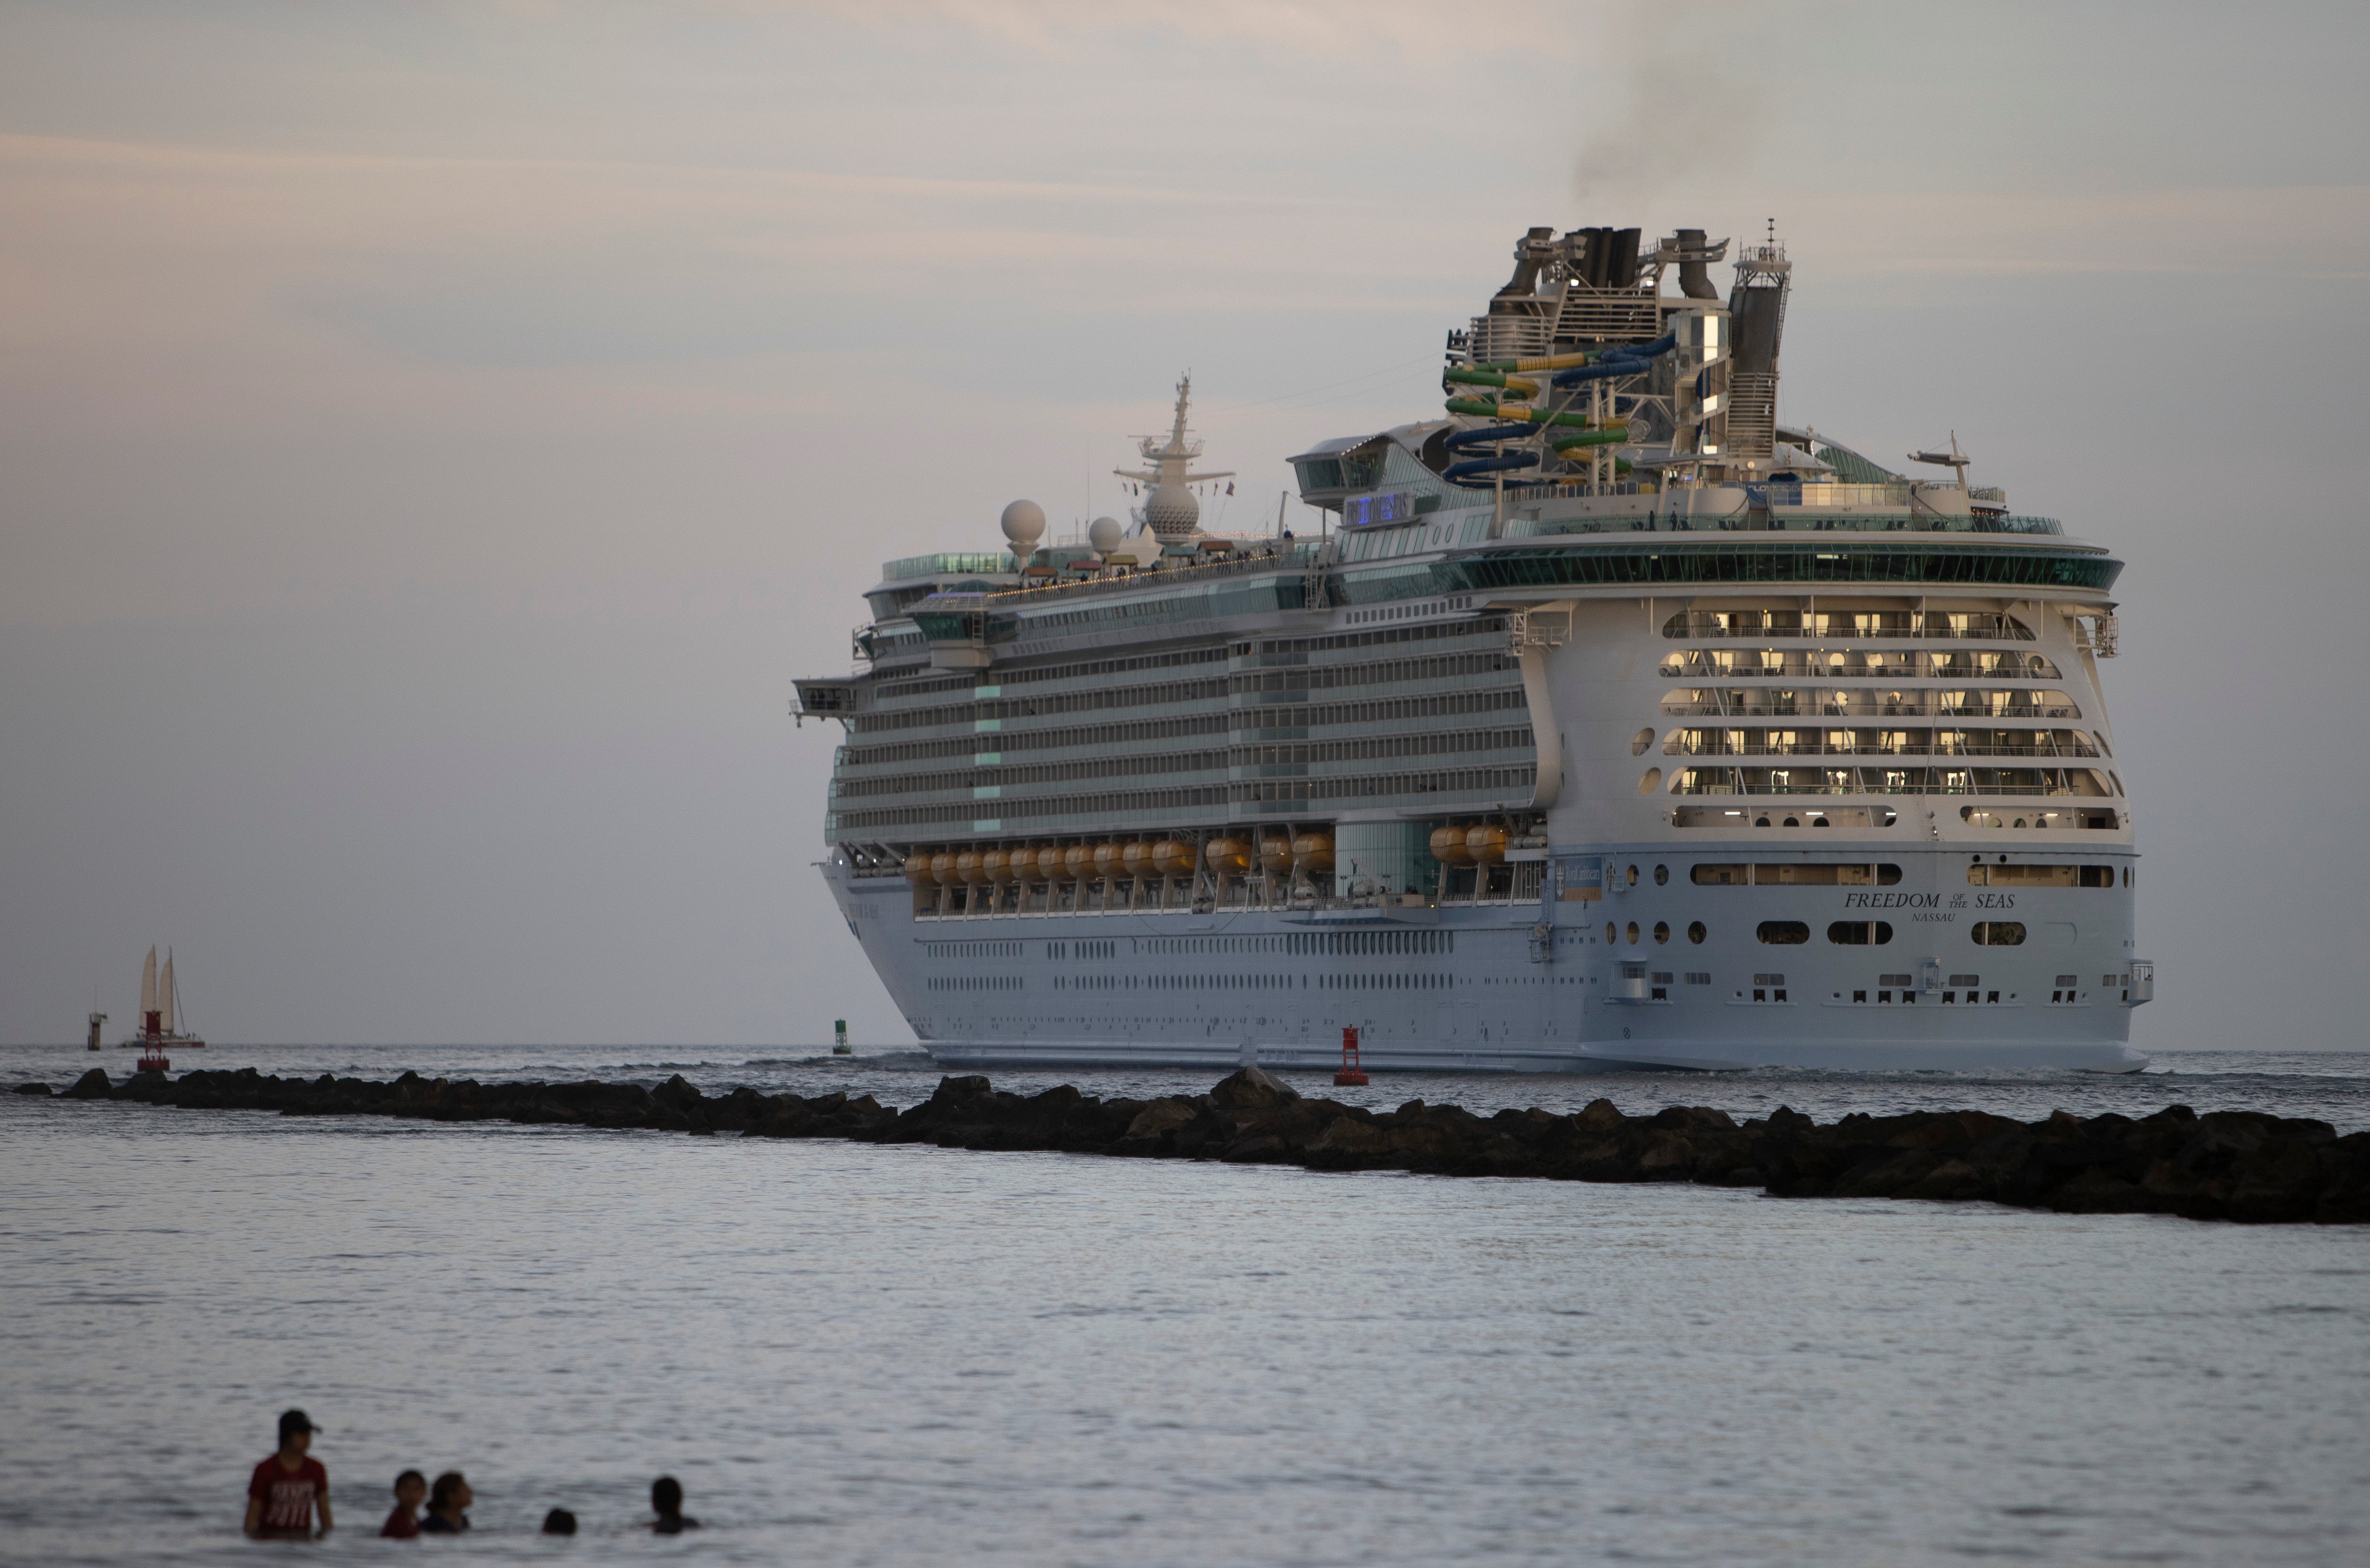 Large cruise ships can drive emissions and kill wildlife, scientists say